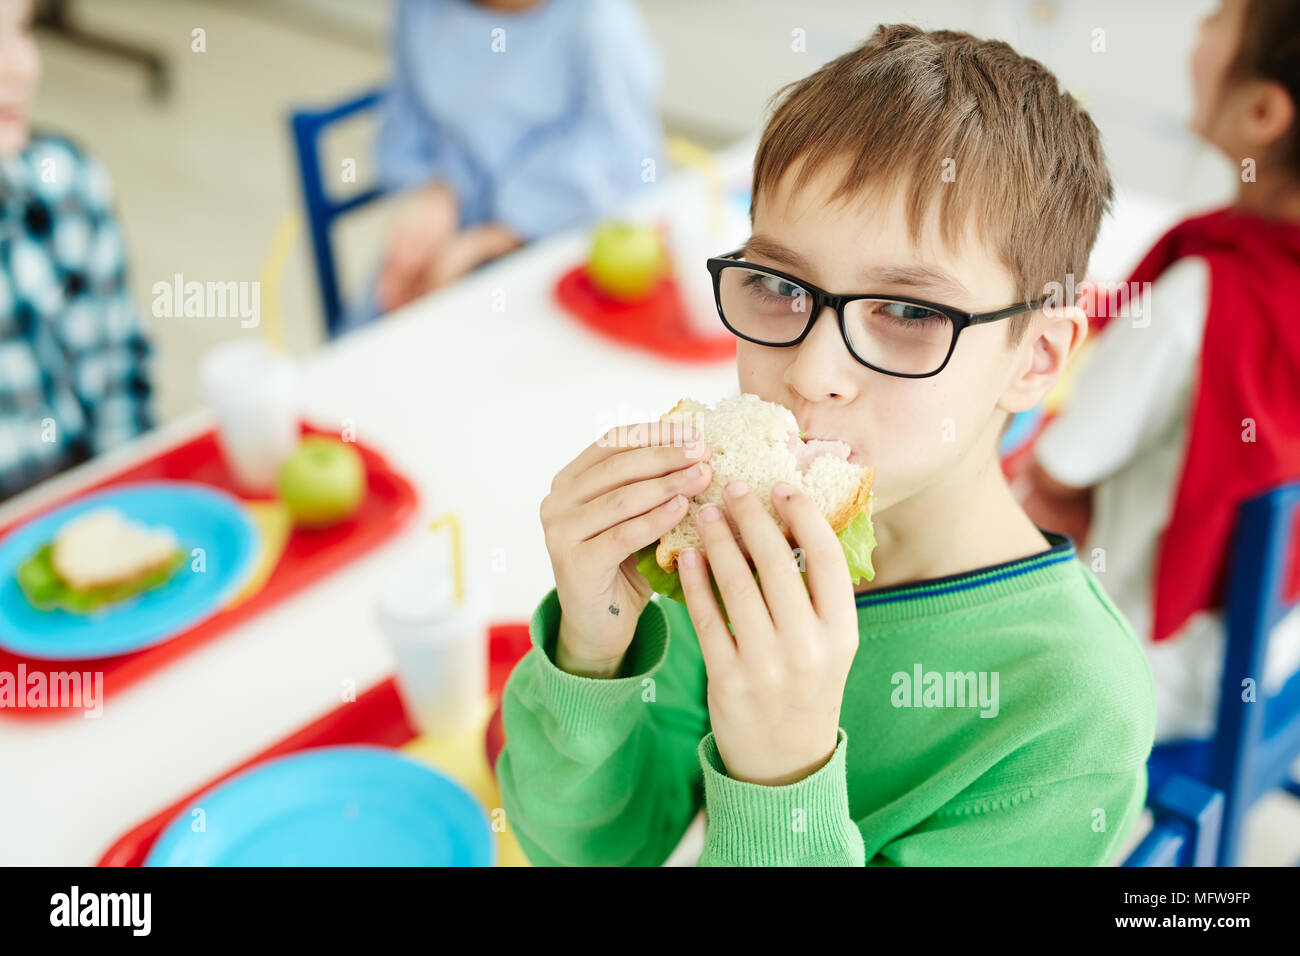 Children eating delicious sandwiches in school canteen Stock Photo - Alamy